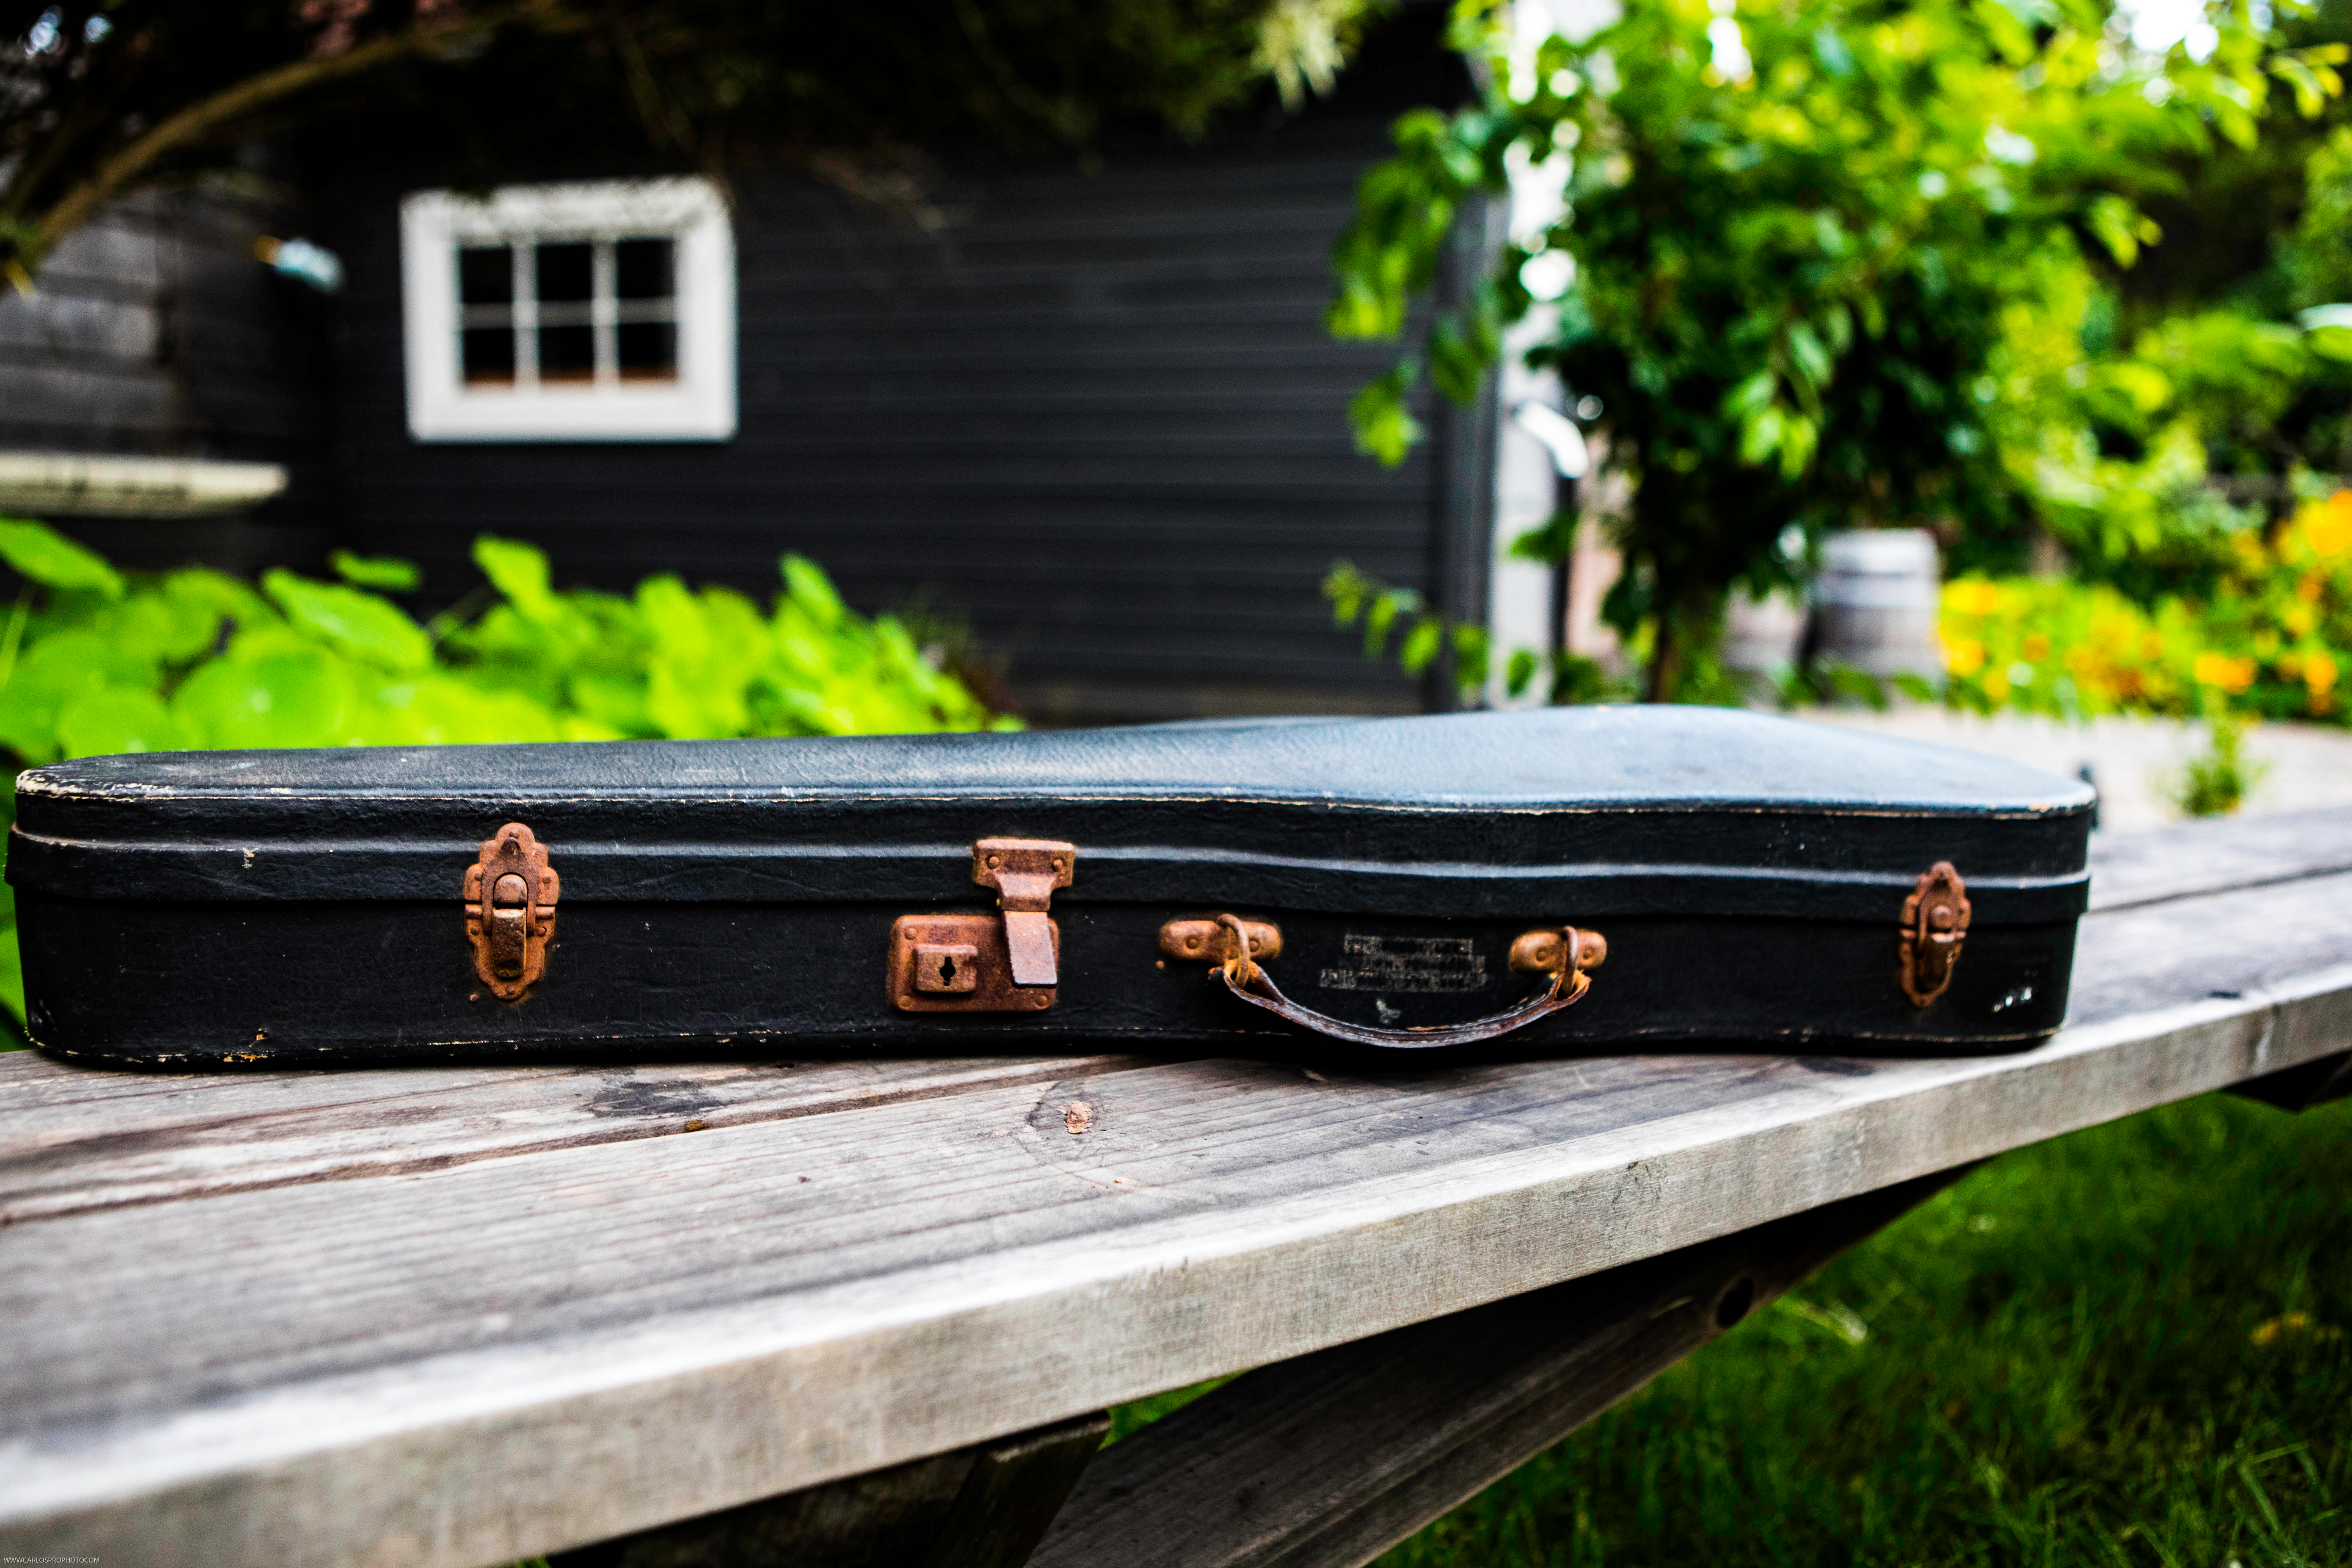 An old violin case | Source: Shutterstock